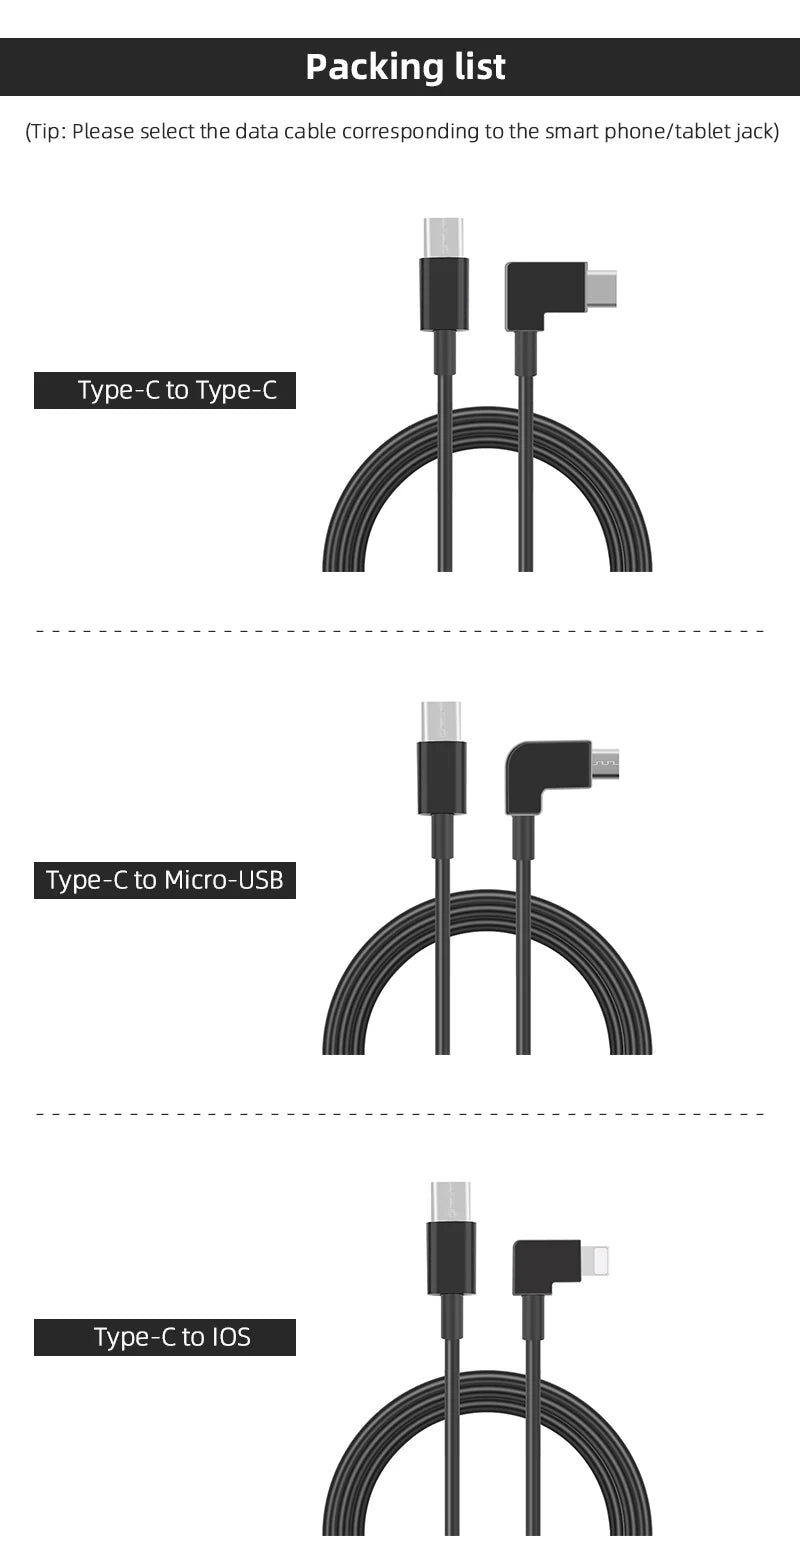 1m Data Cable for DJI FPV Goggles V2, type-C Type-C Micro-USB Typ-Cto IOS . Type